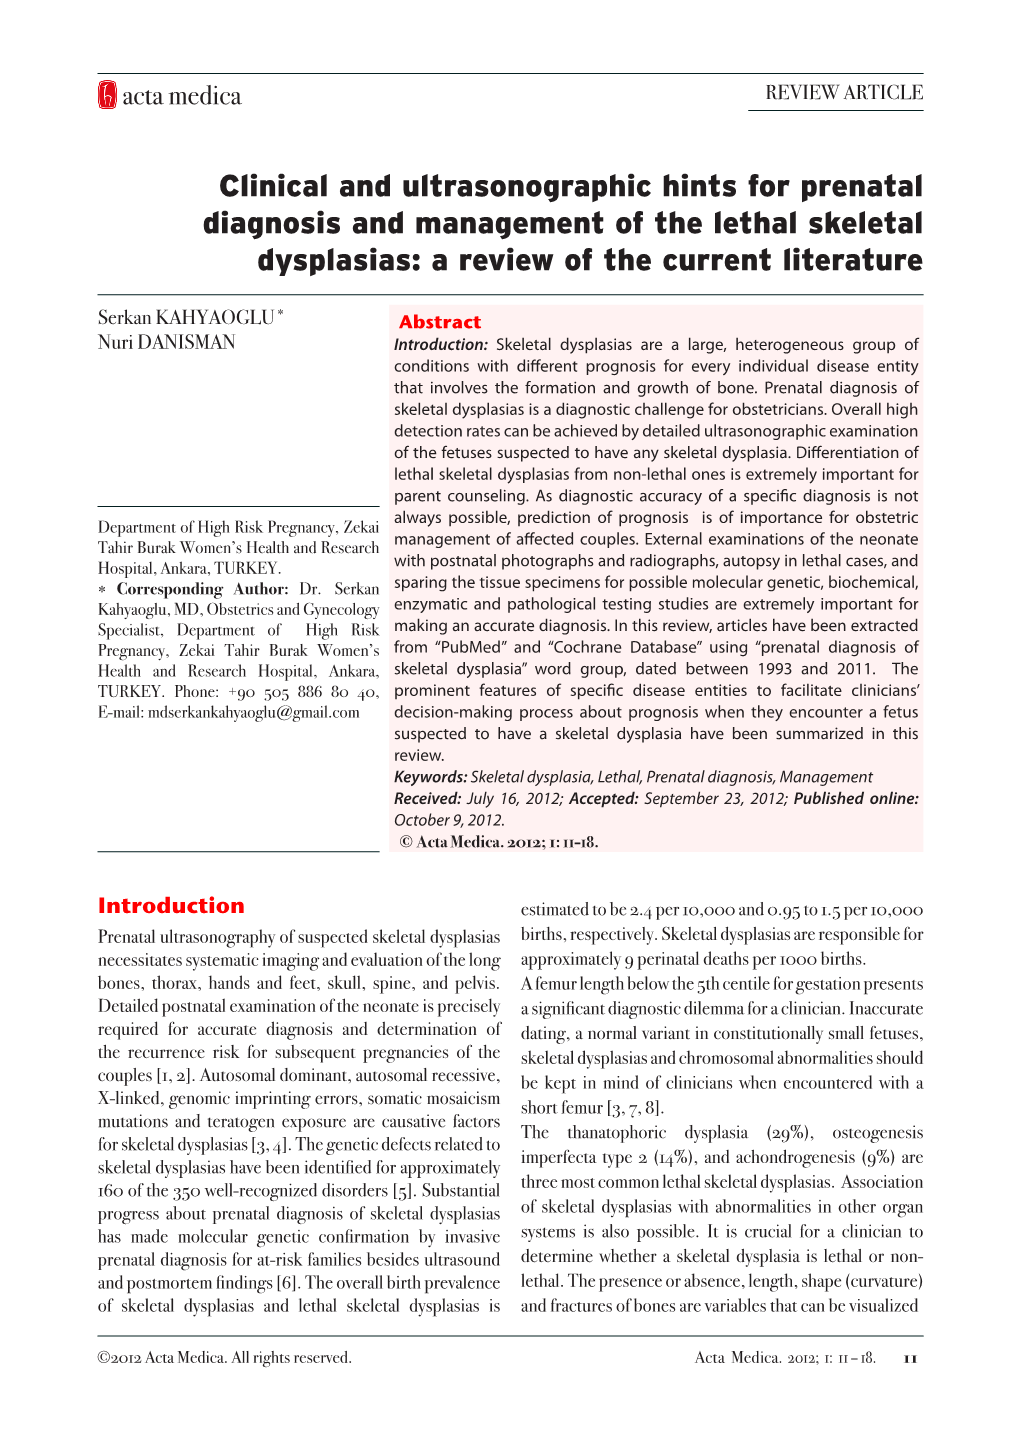 Clinical and Ultrasonographic Hints for Prenatal Diagnosis and Management of the Lethal Skeletal Dysplasias: a Review of the Current Literature